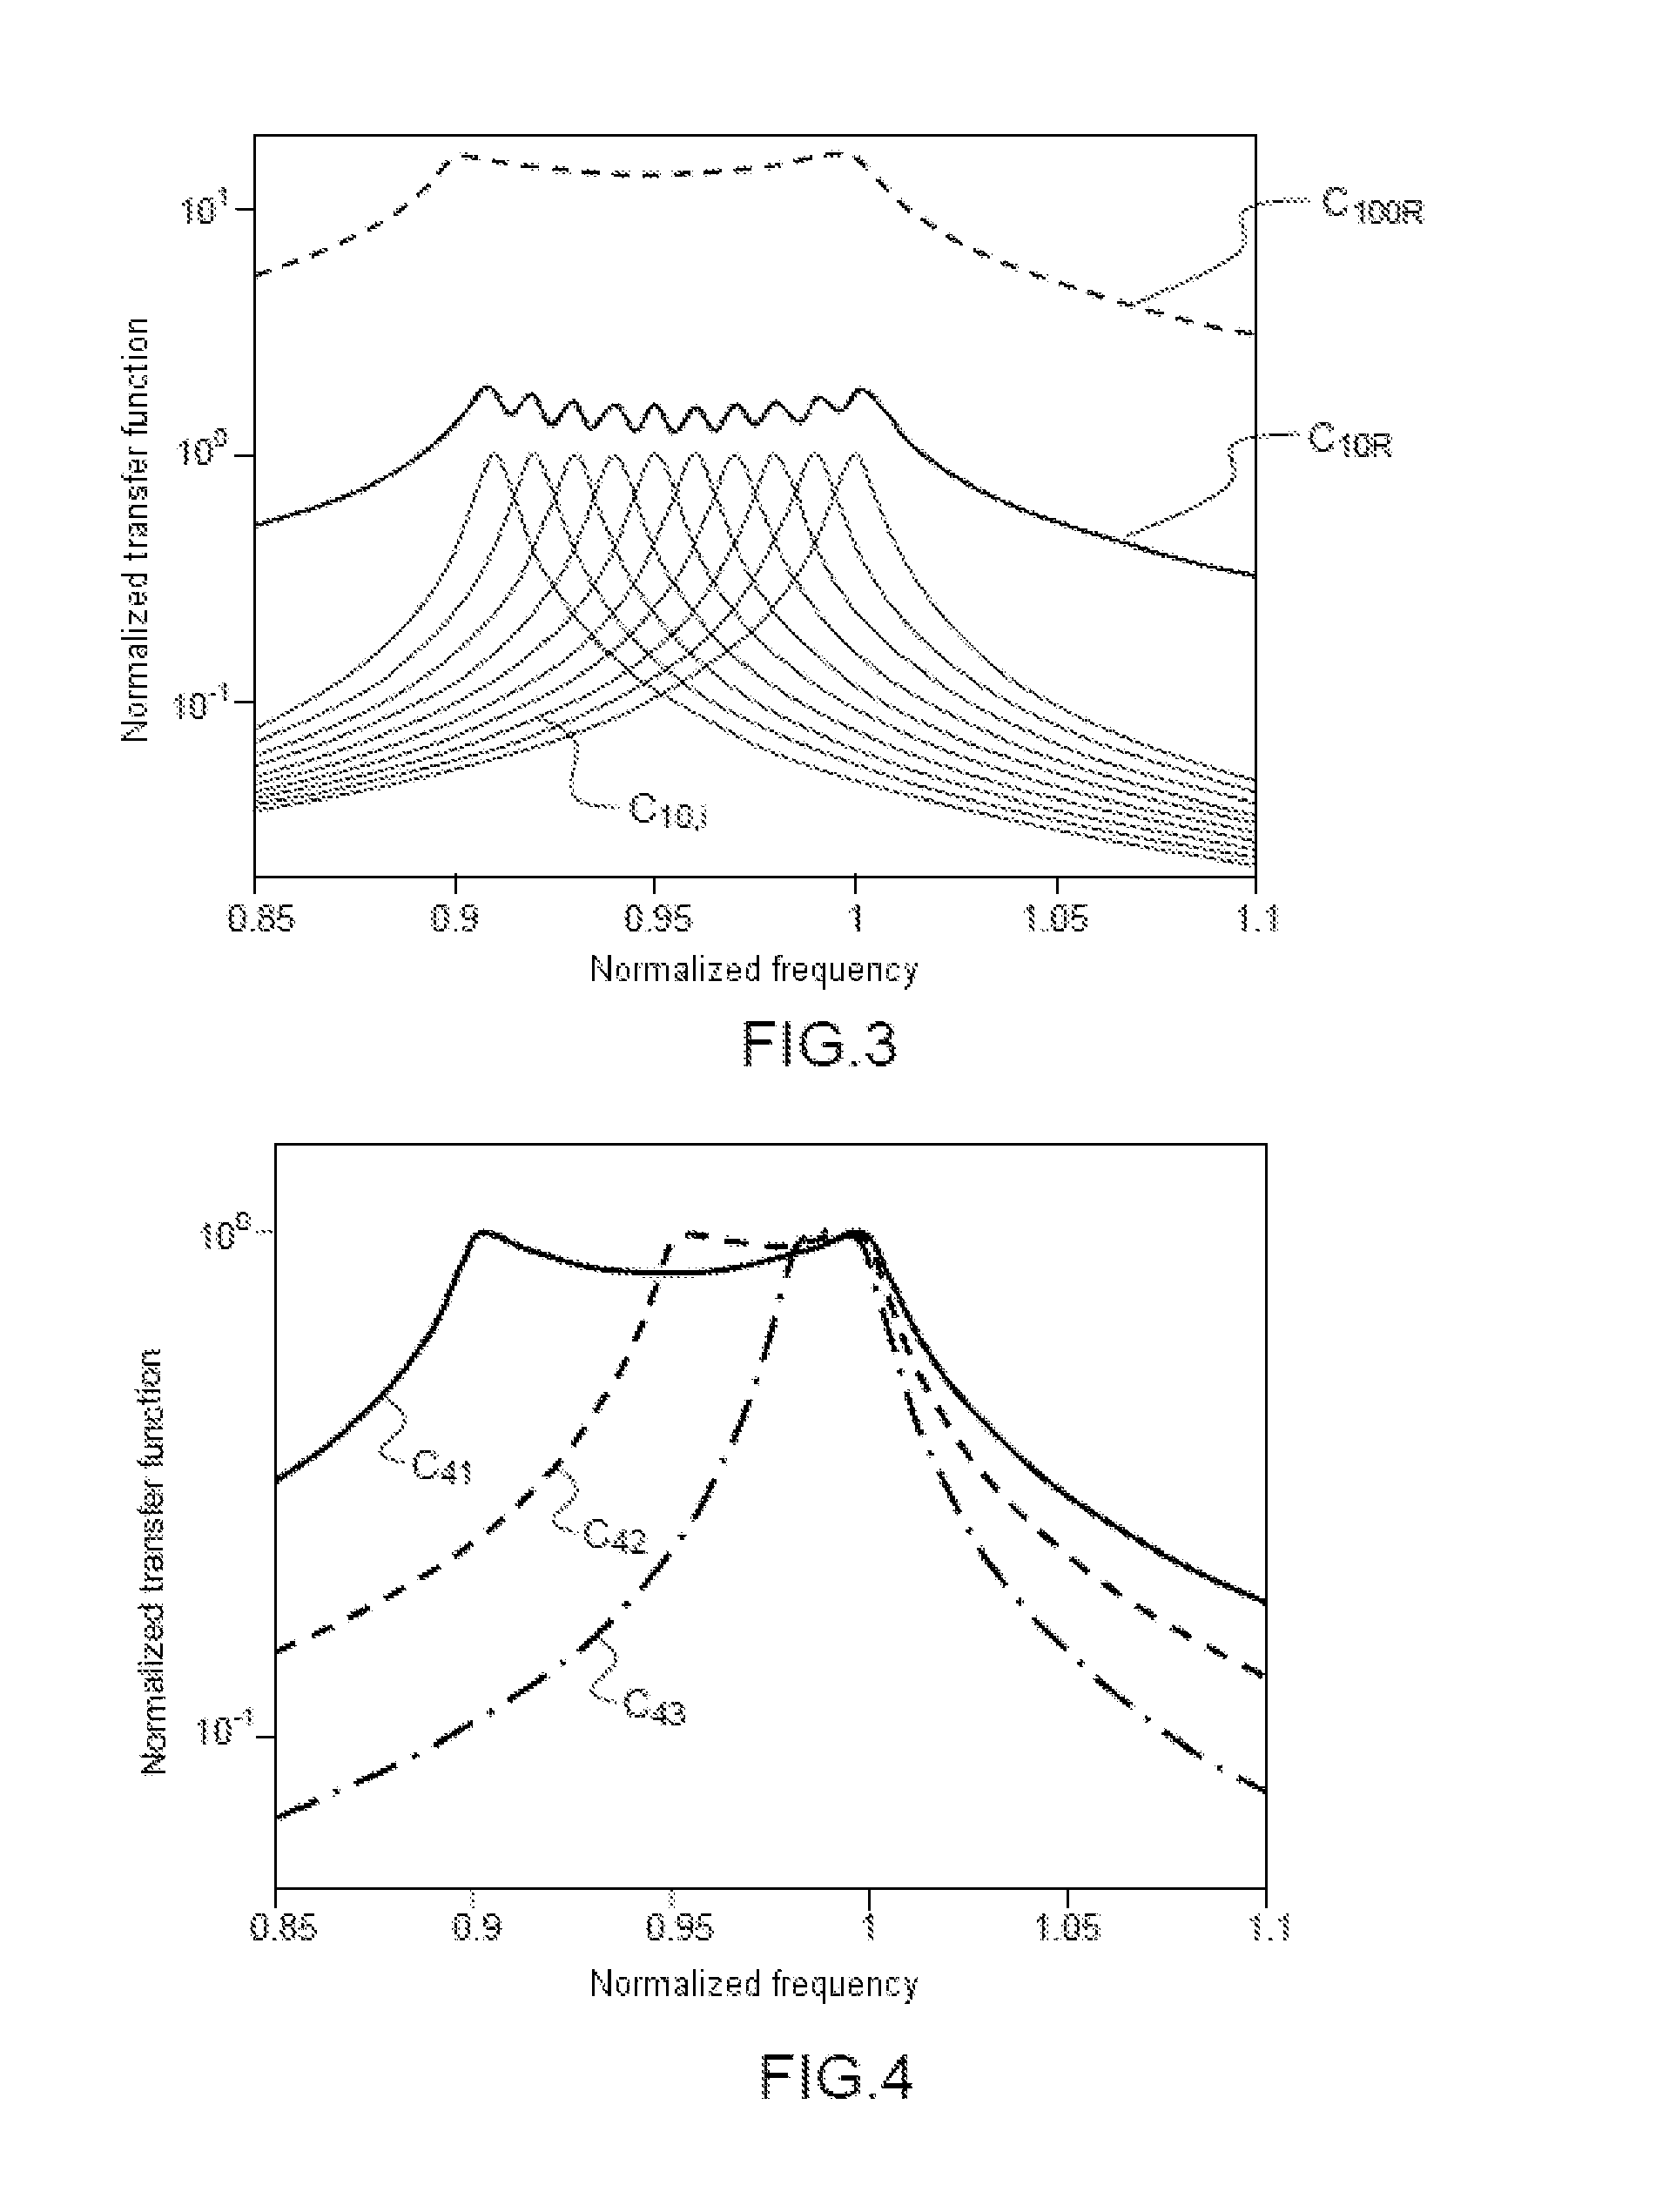 Mems/nems device comprising a network of electrostatically actuated resonators and having an adjustable frequency response, notably for a band-pass filter